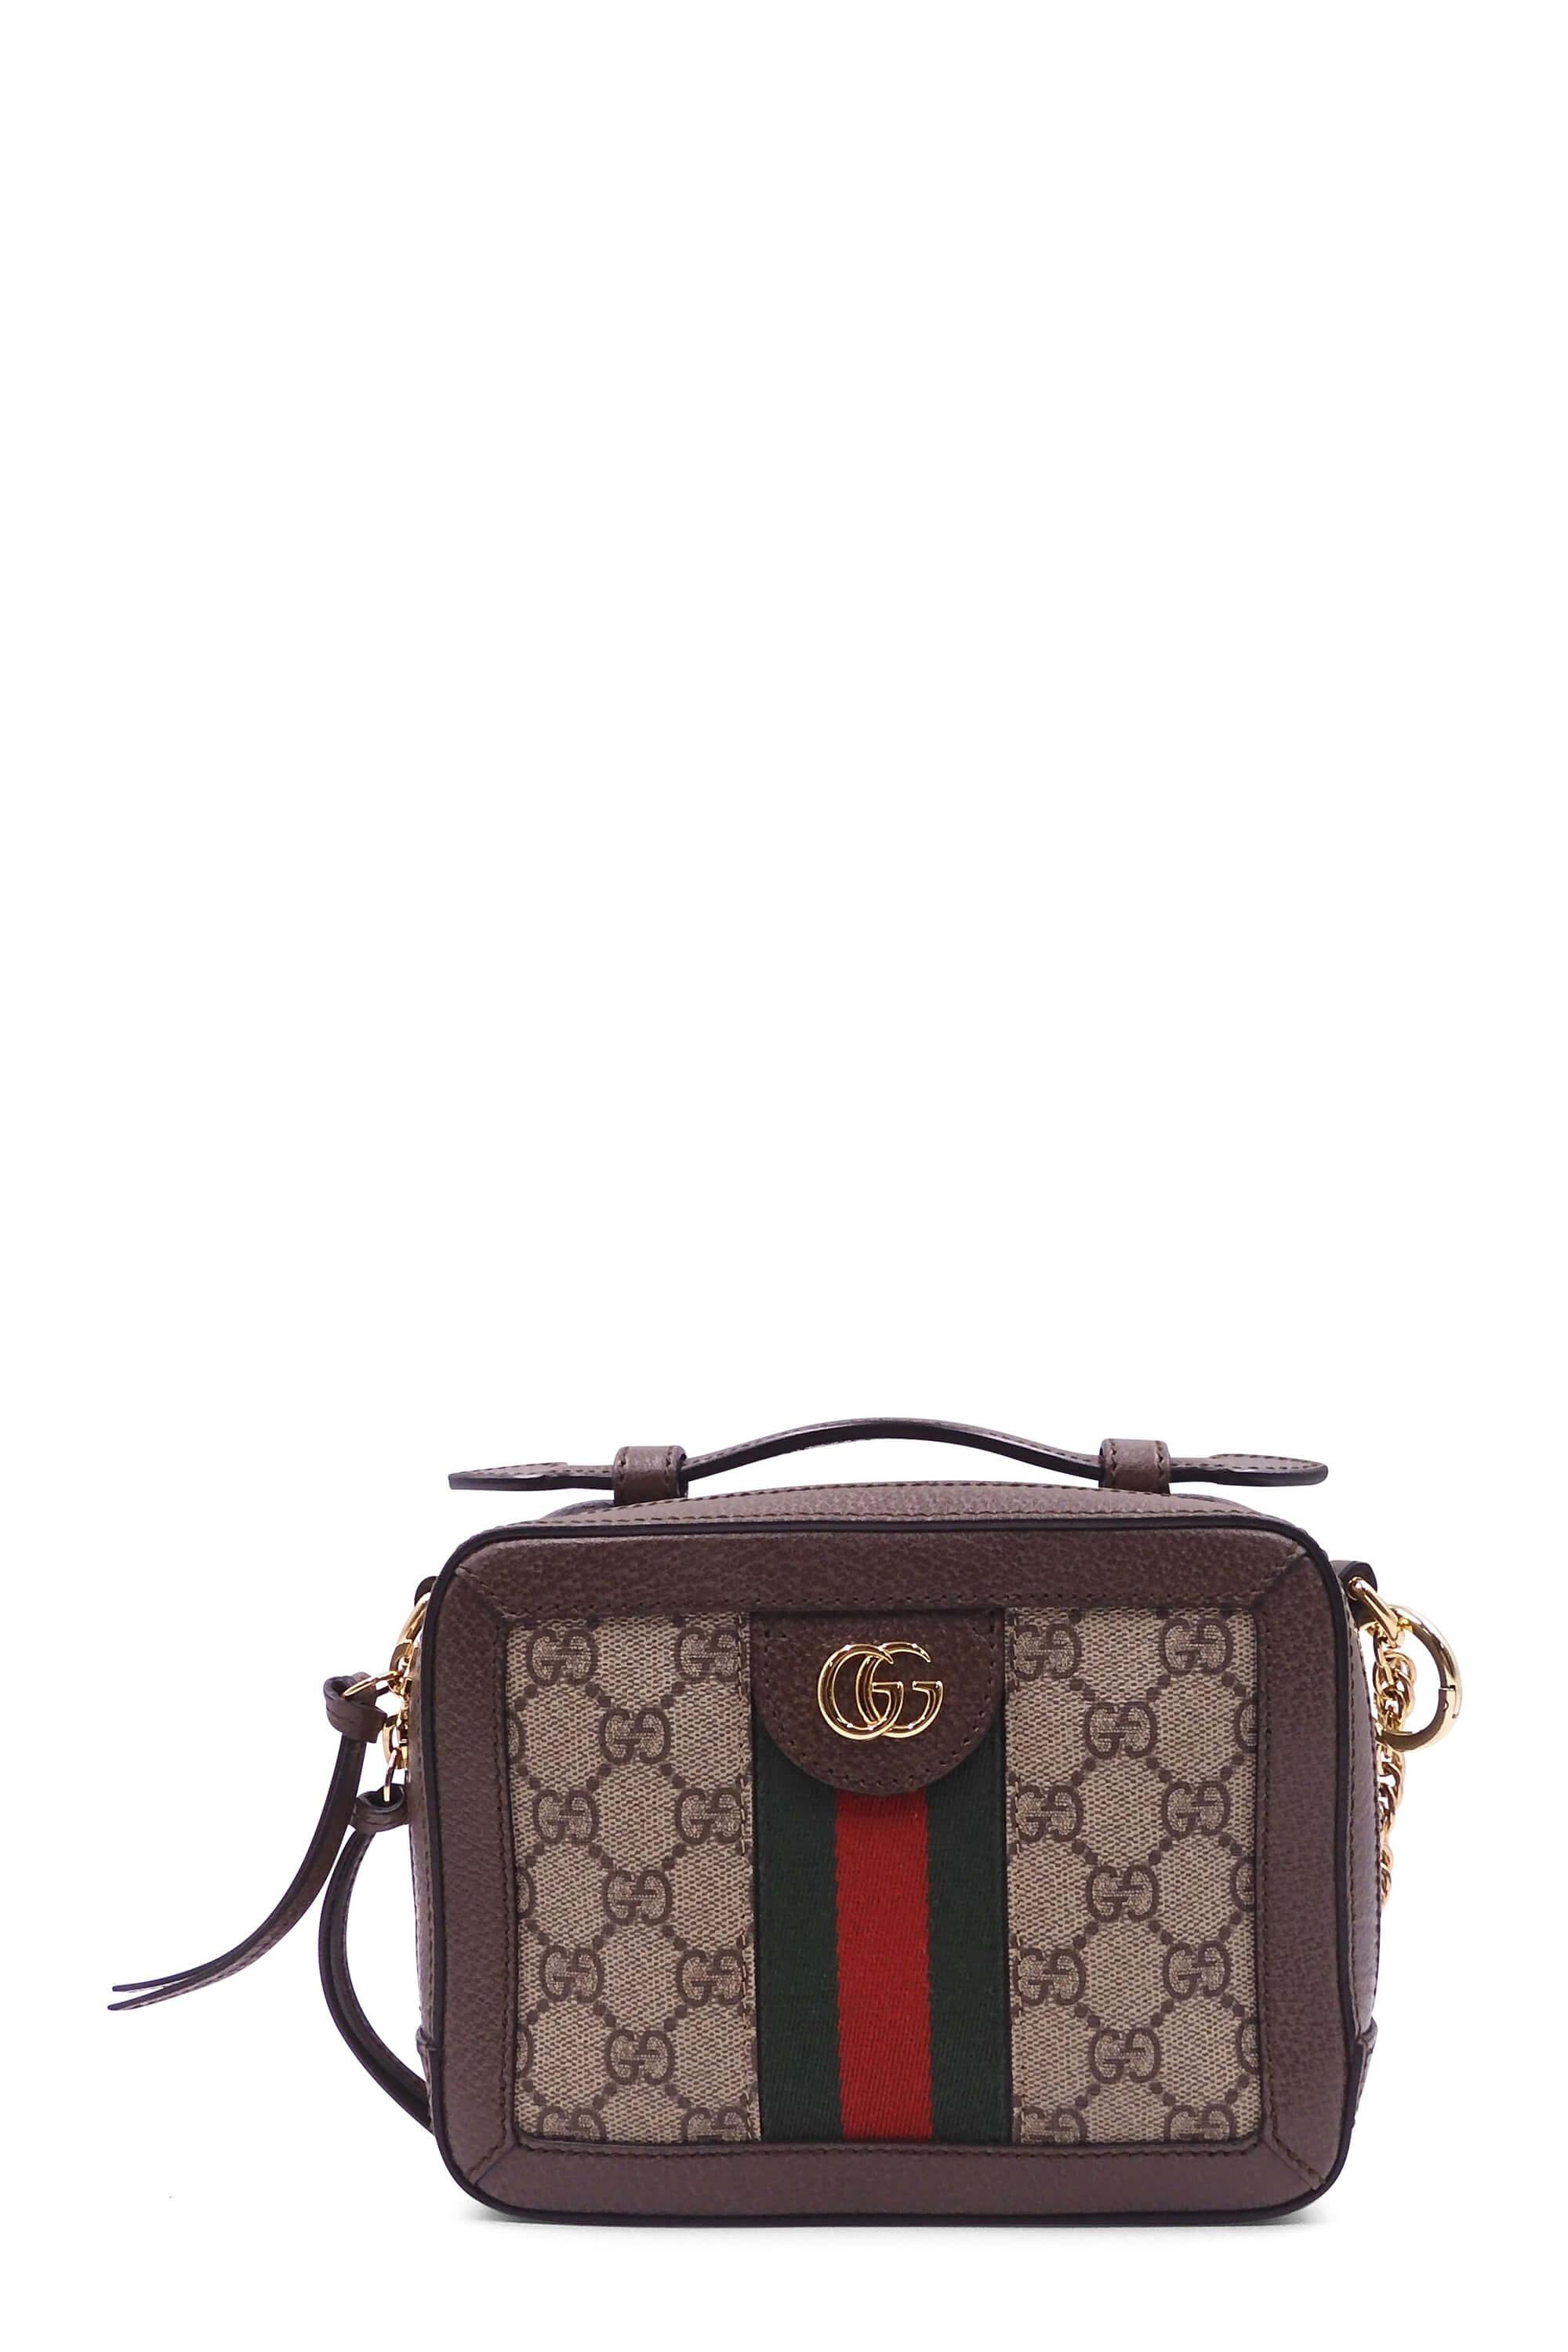 Gucci Mini Ophidia Toiletry Case Brown Gg Supreme Canvas Weekend/Trave -  MyDesignerly